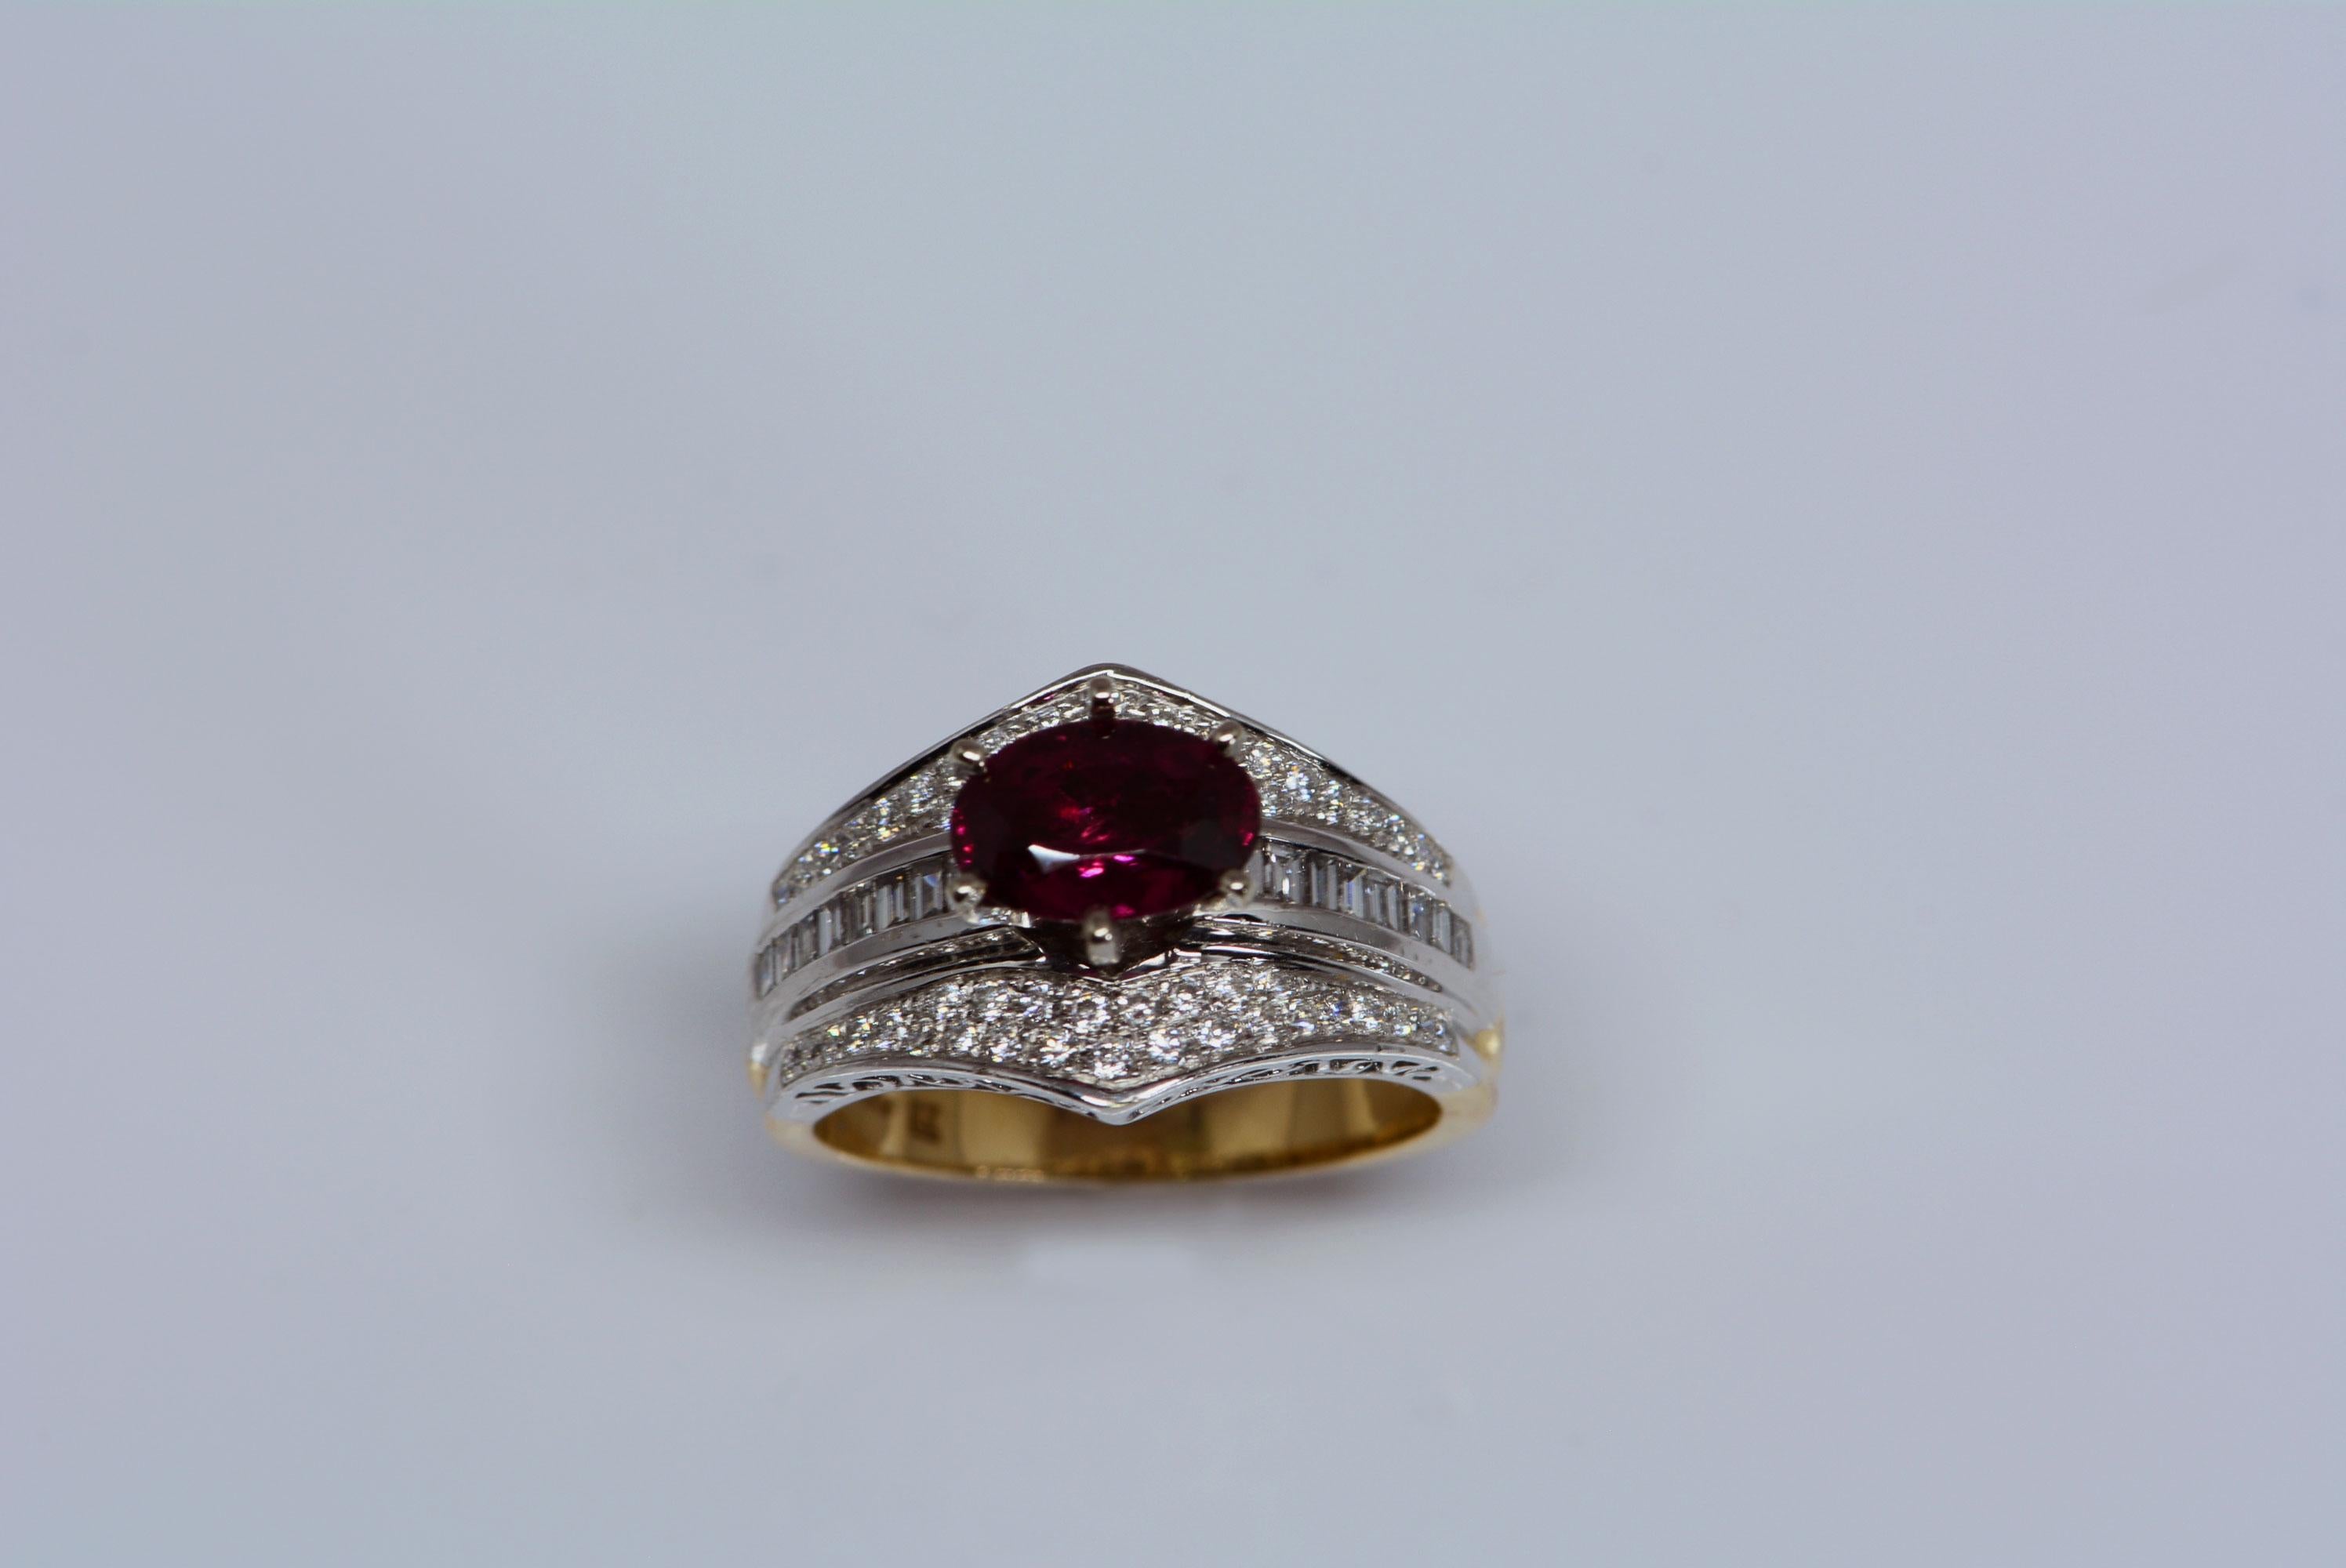 This ring was made by a master goldsmith, who, at one time worked for a well-known, luxury brand jewellery company and also has done some work for foreign dignitaries, and royal families over the last thirty plus years of his career.
He opened his